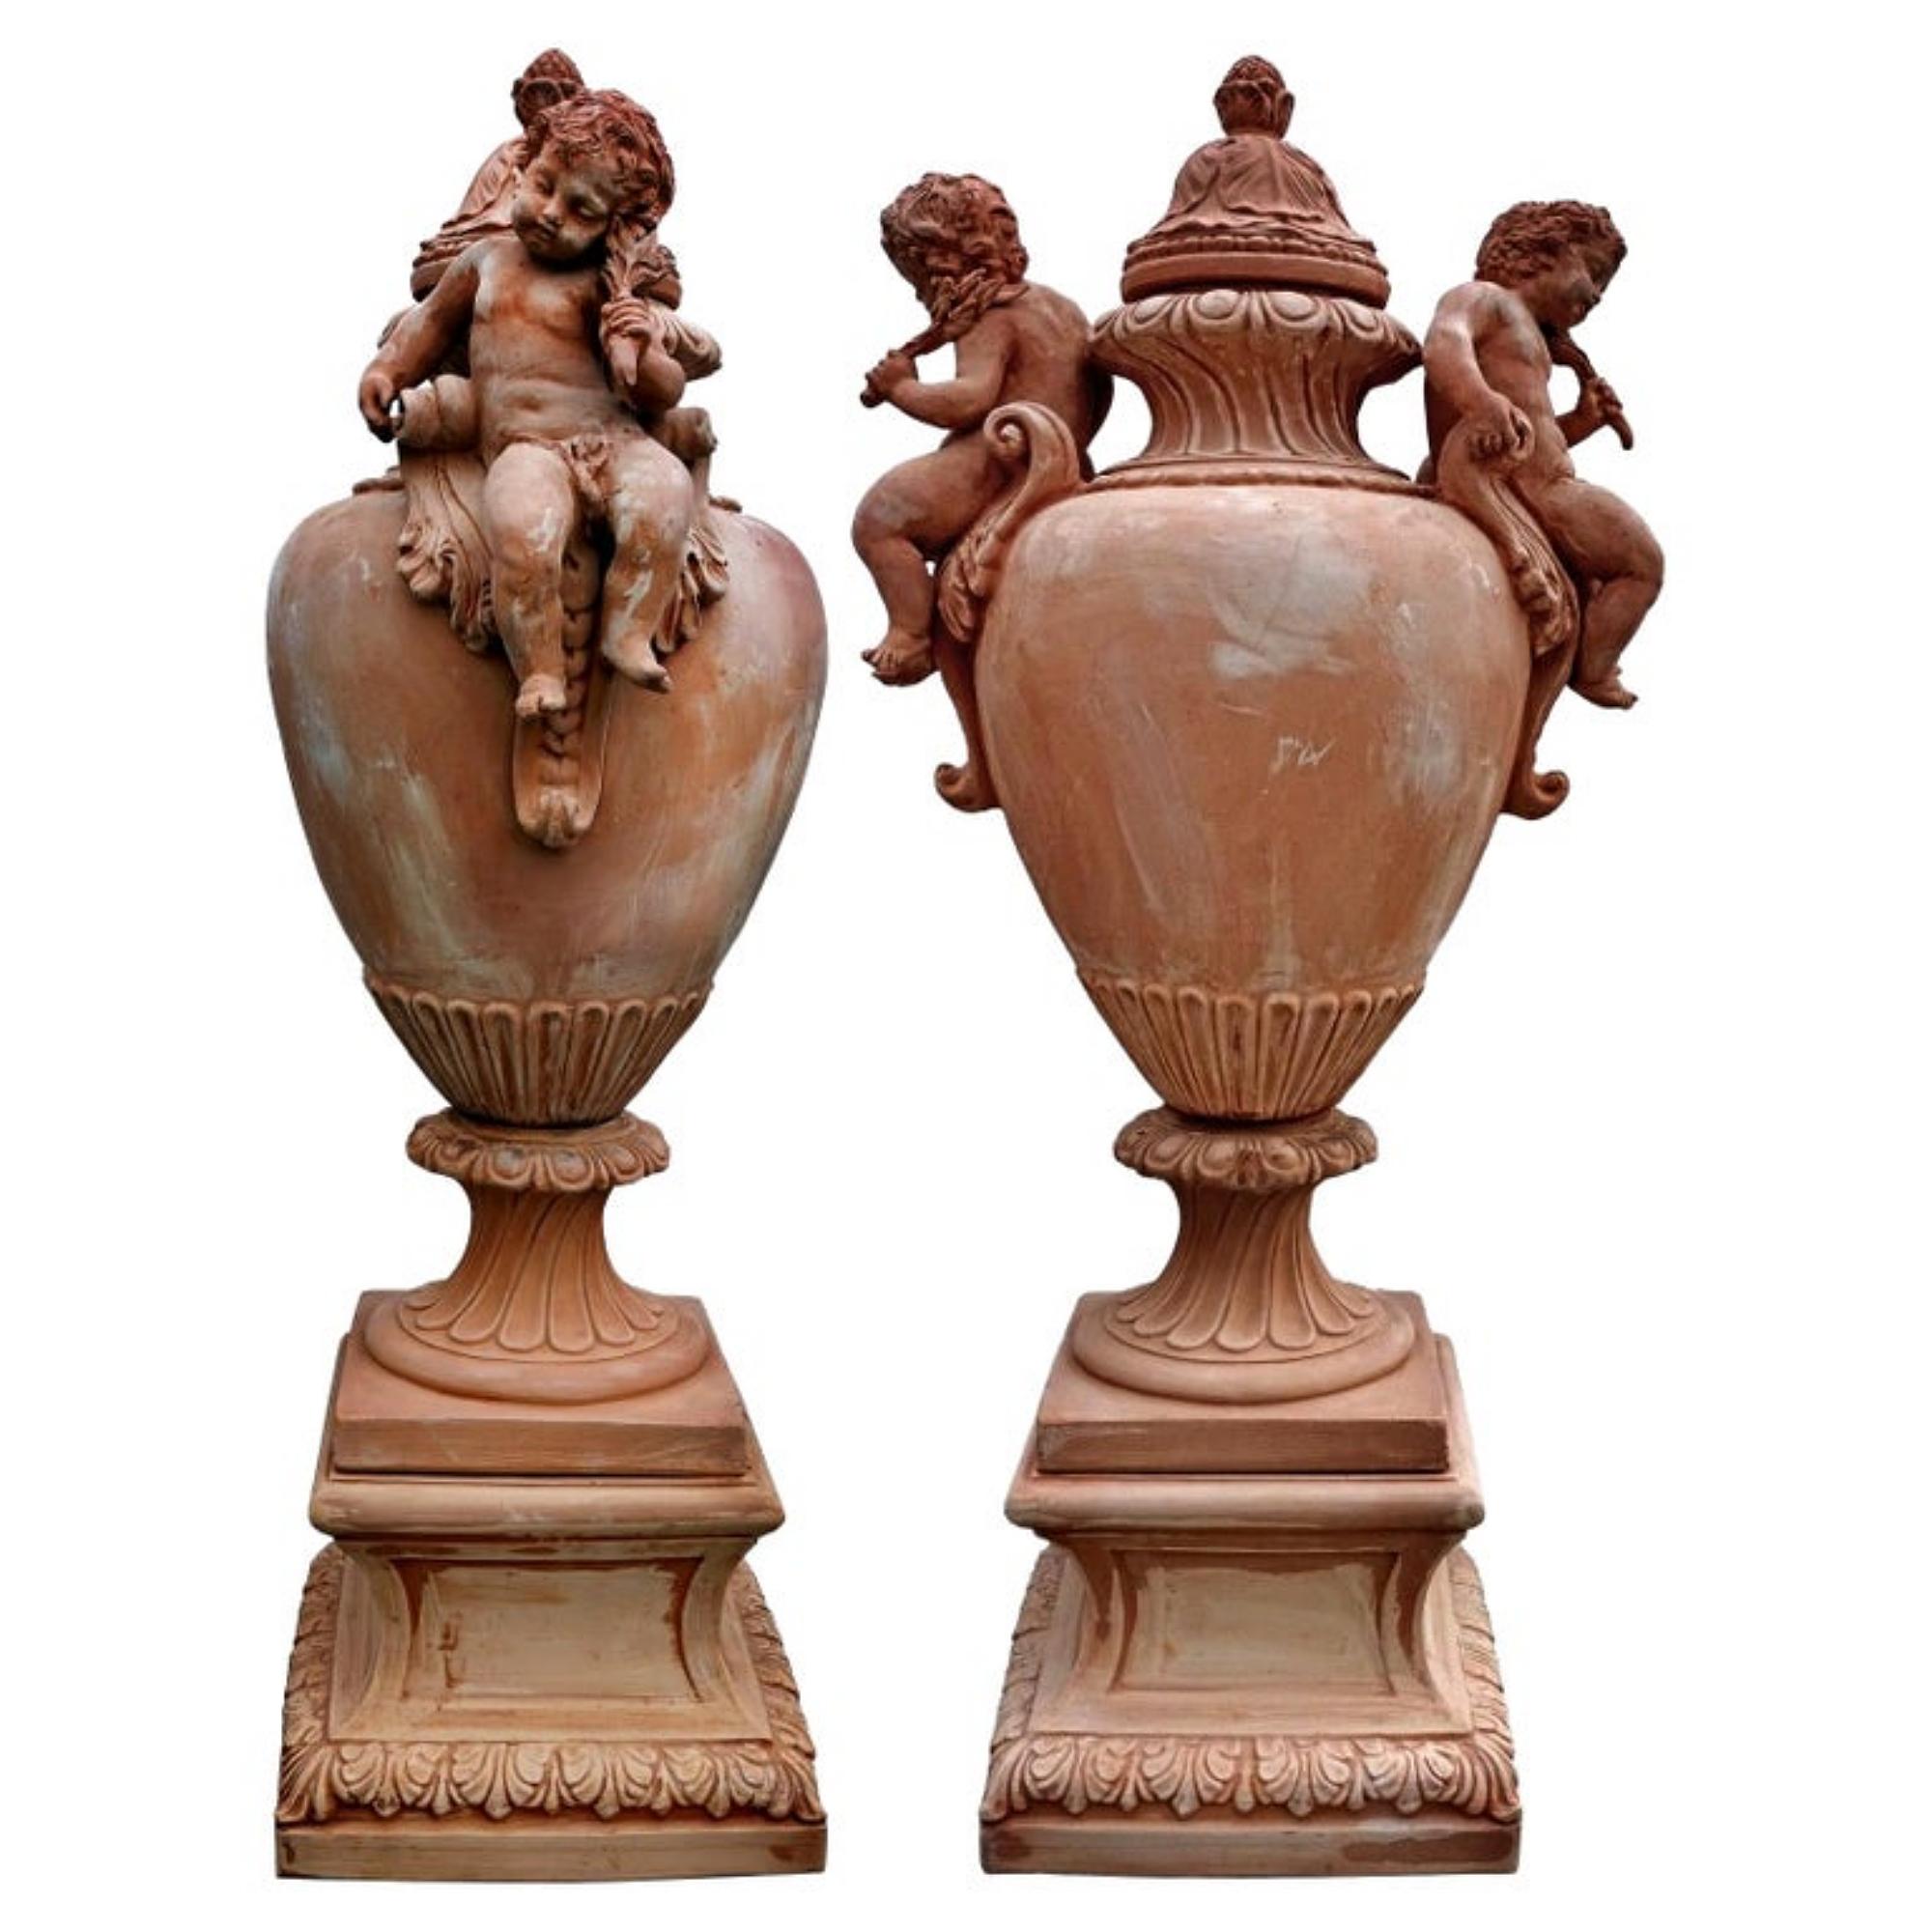 Hand-Crafted Huge Pair Baroque Vases with Putti, Terracotta, Late 19th / 20th Century For Sale